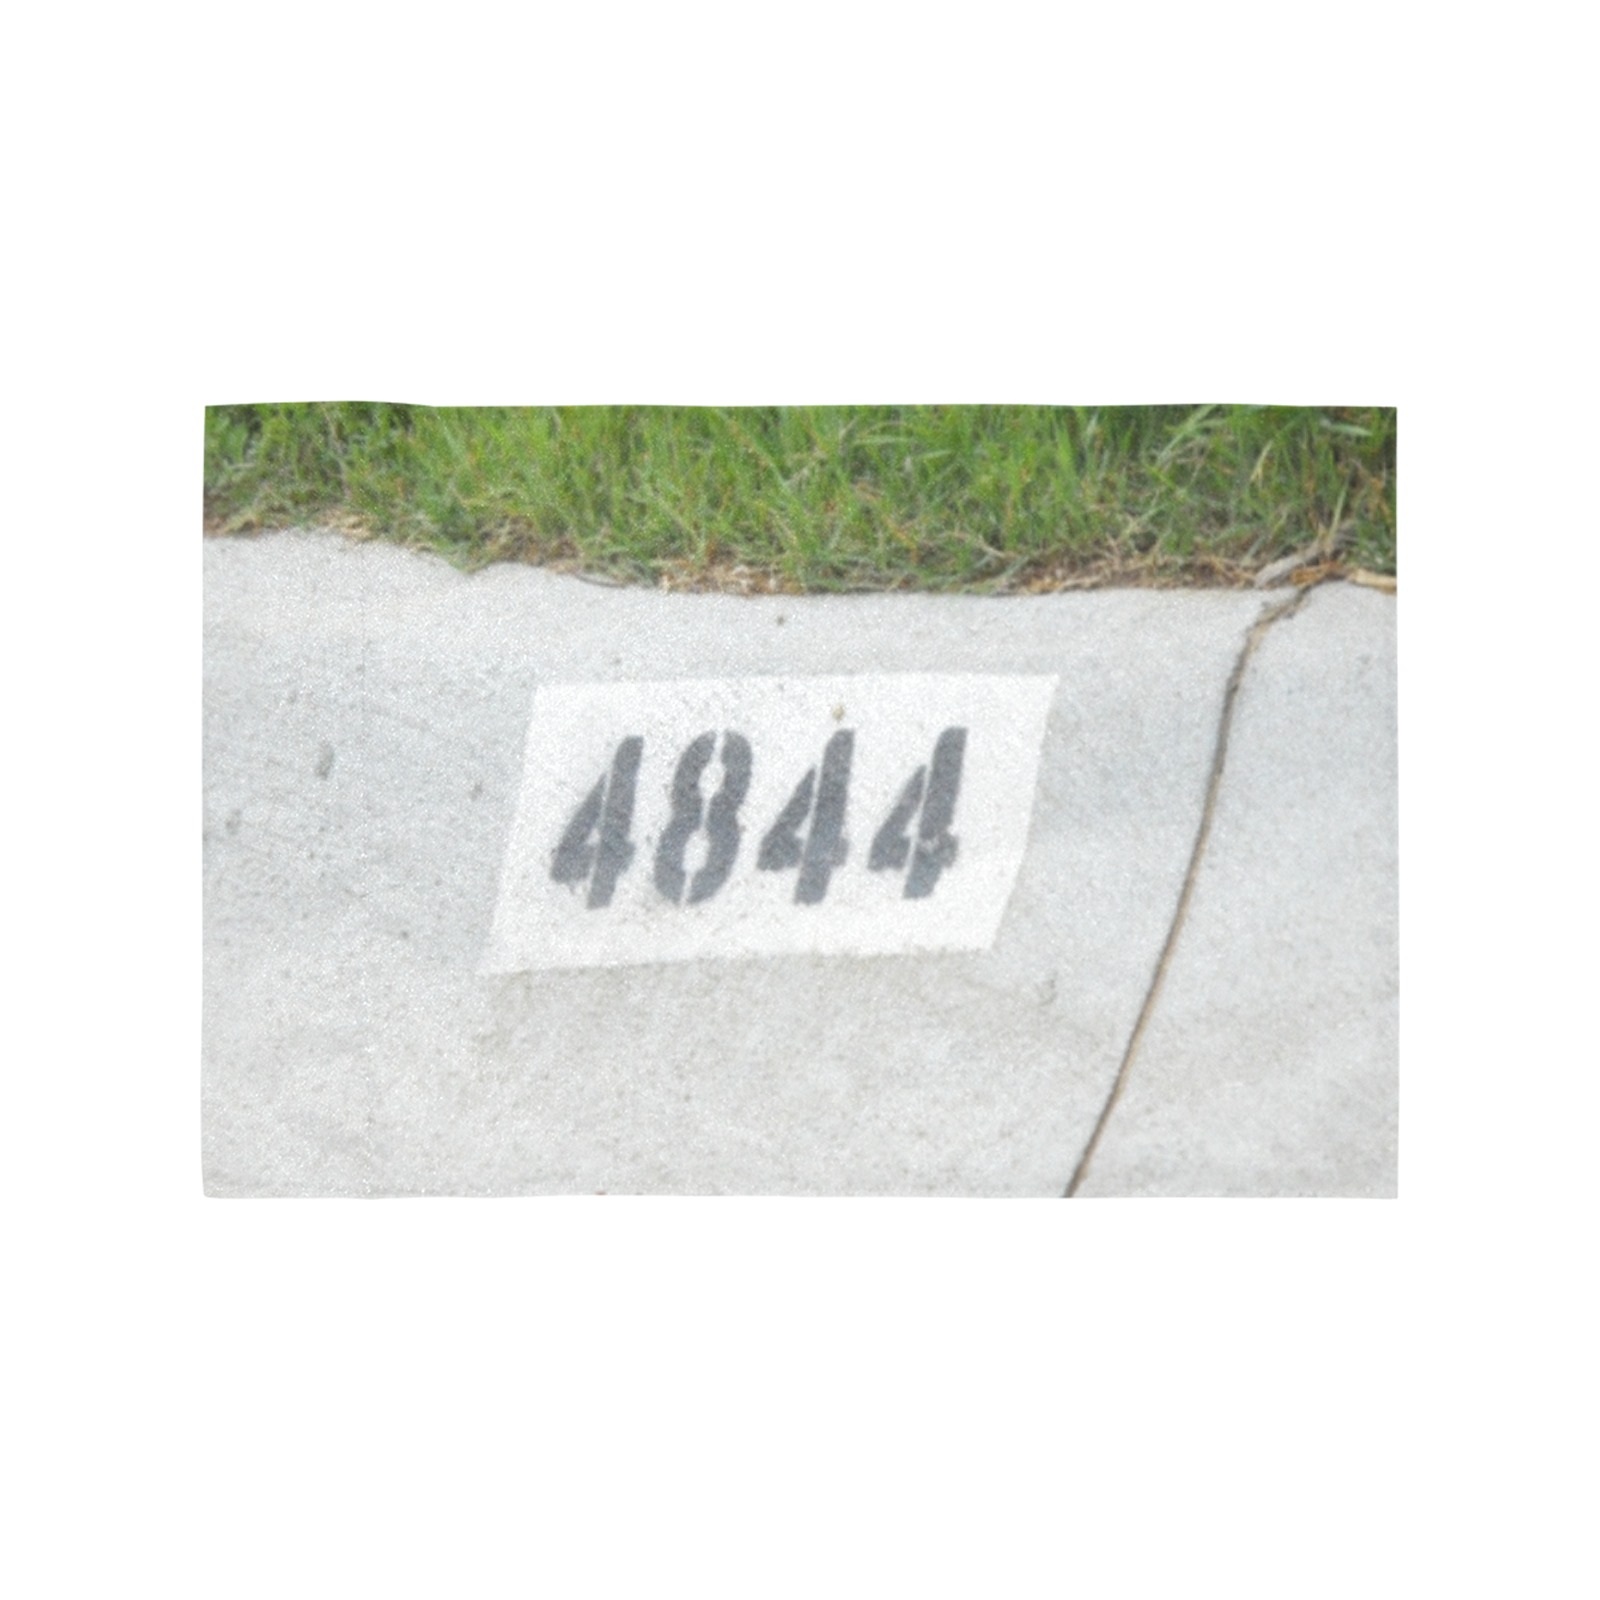 Street Number 4844 Motorcycle Flag (Twin Sides)